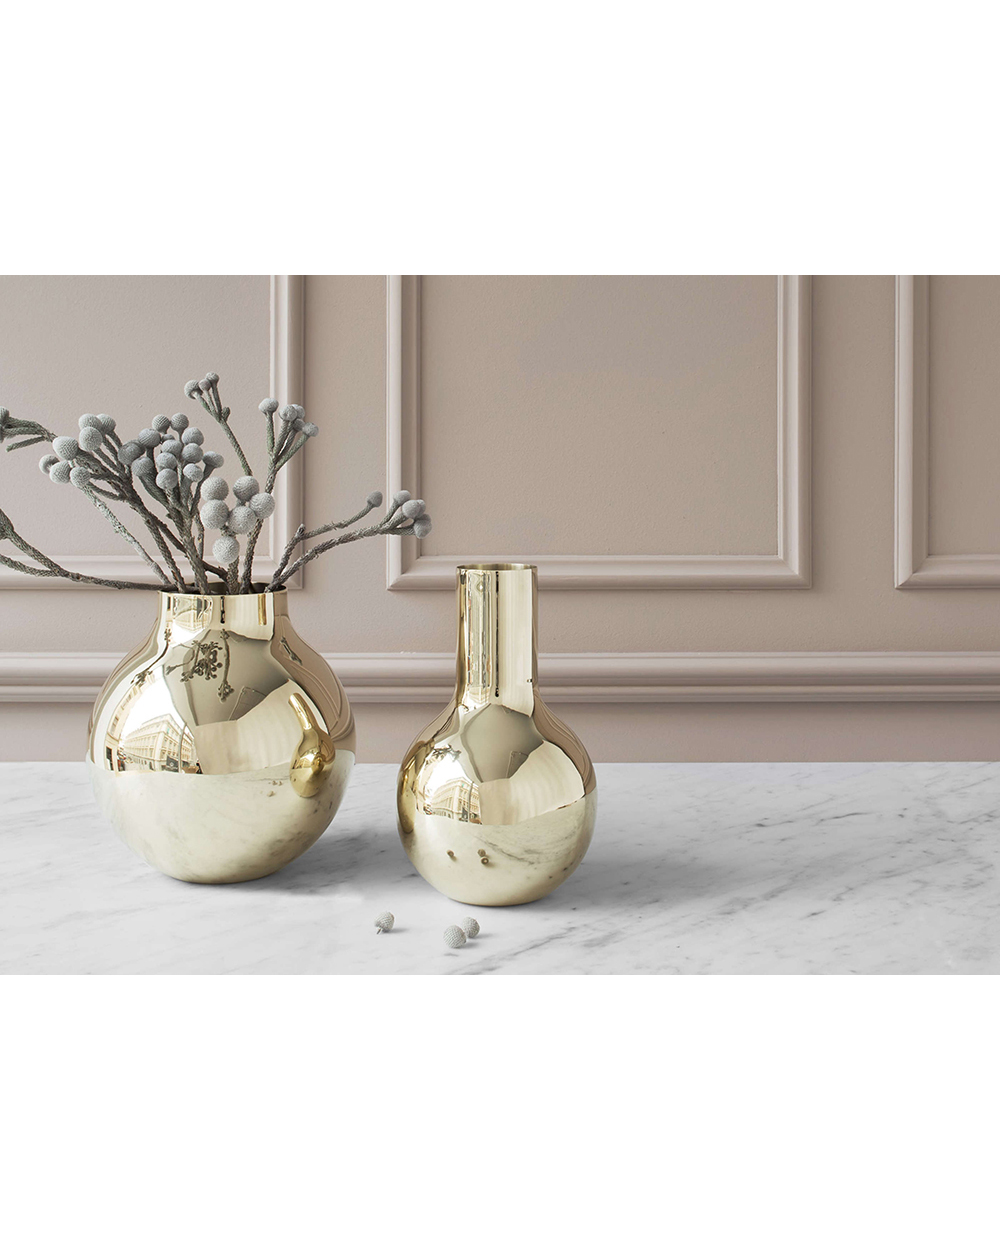 Skultuna boule vase from $169 from Simon James